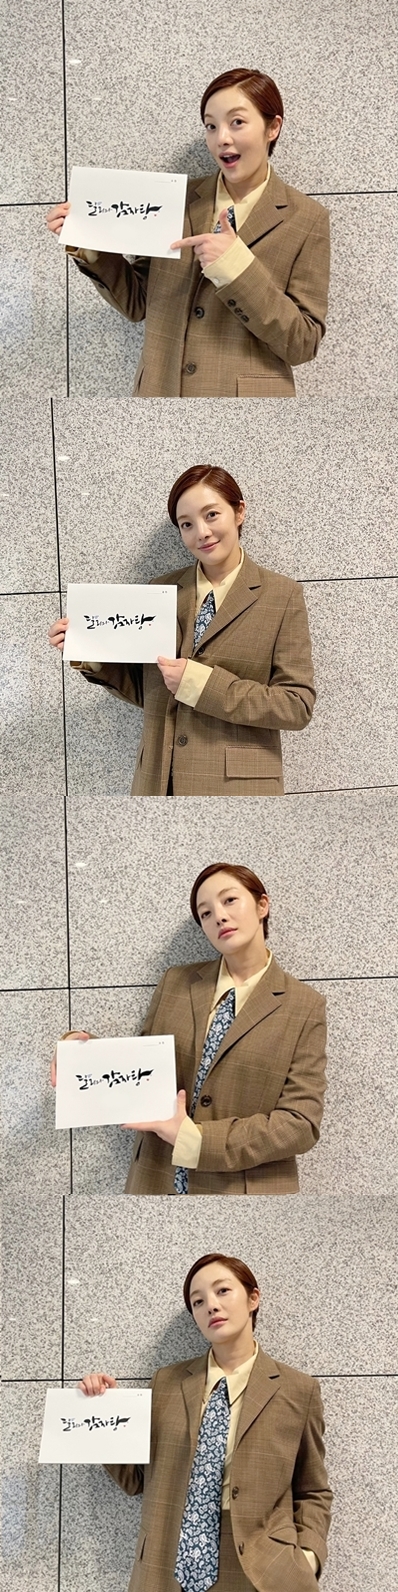 Actor Hwang Bo Ra has launched a first-room shooter in Dary and Gamja-tang.KBS 2TVs new Wednesday-Thursday evening drama Dari and Gamja-tang (playplayplay by Son Eun-hye, directed by Lee Jung-seop) is showing a photo of the encouragement of first shooter by Hwang Bo Ra, who is foreseeing her performance as a broken secretary Miri of Jin Mu-hak (Kim Min-jae).The released photo shows Hwang Bo Ra holding the script of Dali and Gamja-tang.Hwang Bo Ra has completed a four-cut encouraging shot of Public Fairy with various poses, from a cute smile to a chic expression of Miri in the play.In addition, the forceful appearance of Hwang Bo Ra, which has a straight pomade hair and suit fashion in the photo, is raising expectations for the Miri character.On the other hand, KBS 2TVs new Wednesday-Thursday evening drama Dari and Gamja-tang starring Hwang Bo Ra is Ignorance - Ignorance - Untaught 3 Ignorance - Untold 3 Nice but one of the life power is  The narrowing art romance will be the first at 9:30 tonight